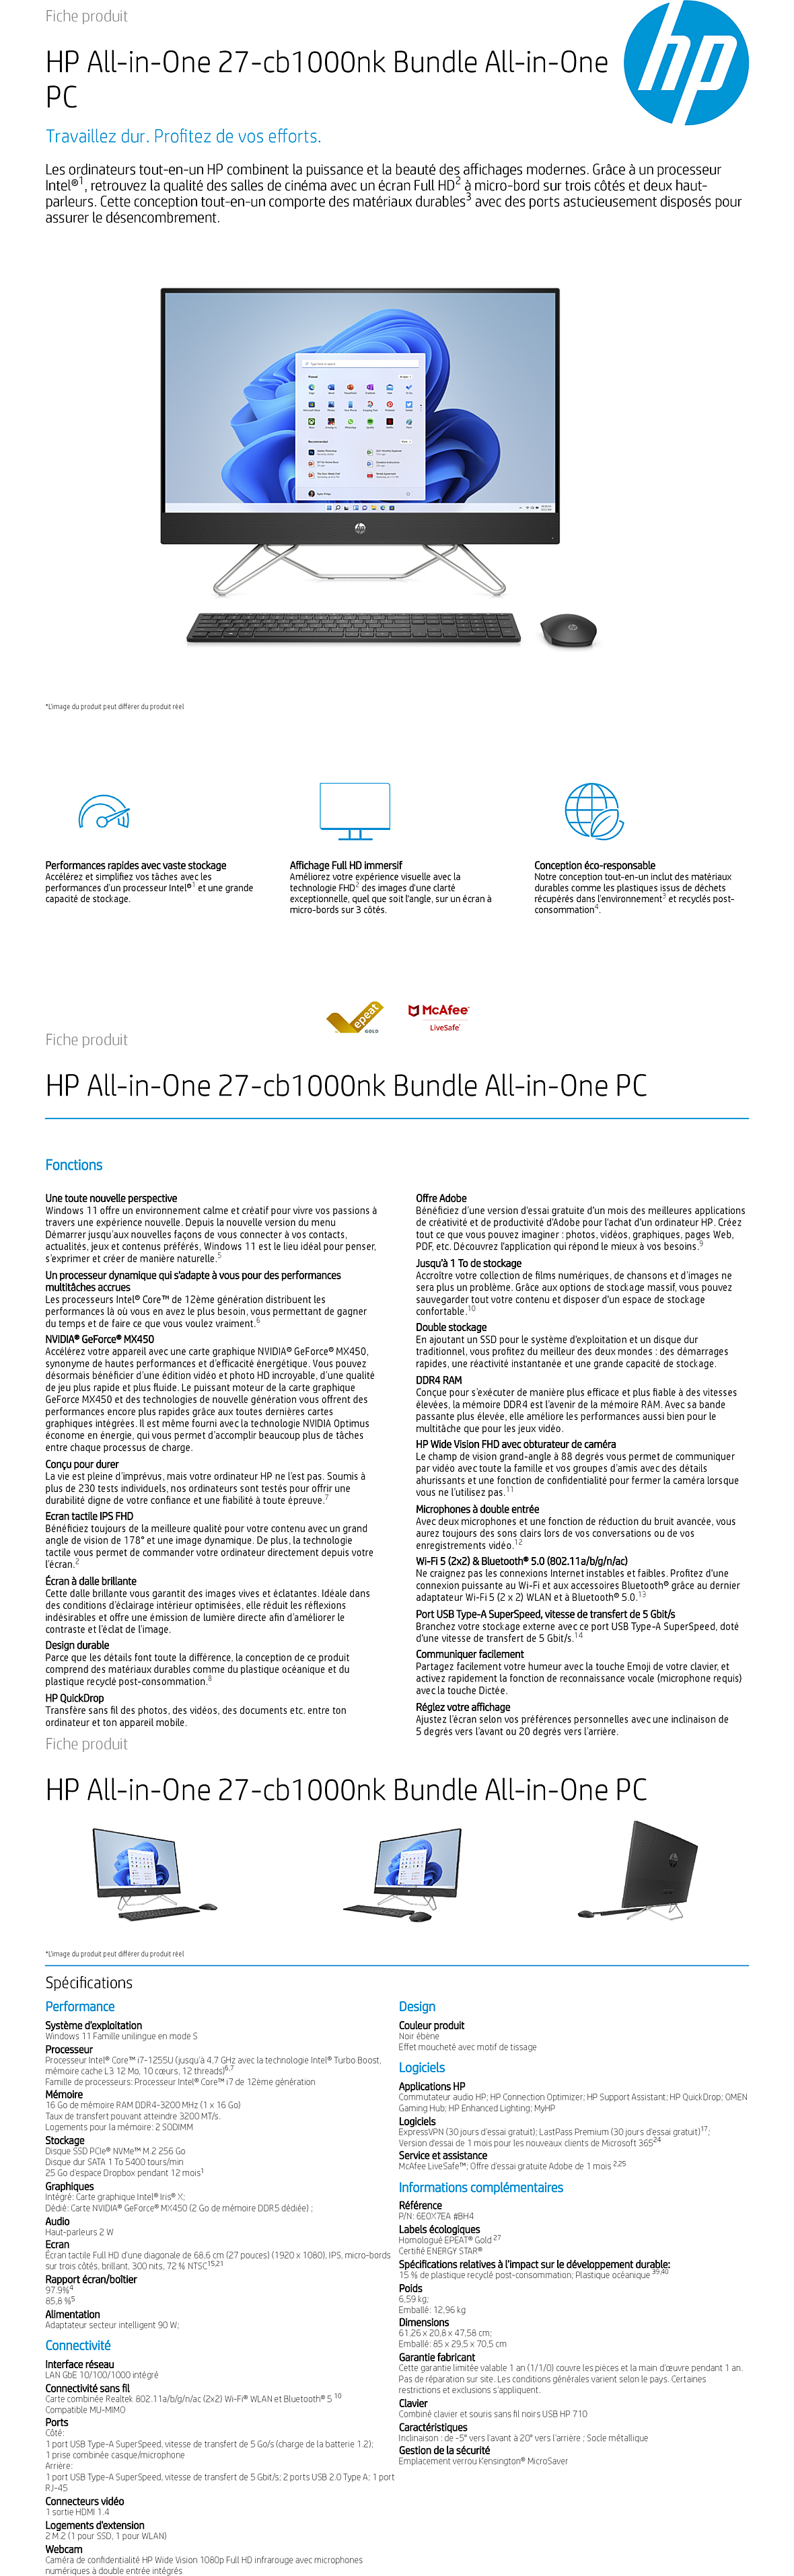 HP All-in-One 24-cb1000nk Bundle All-in-One PC